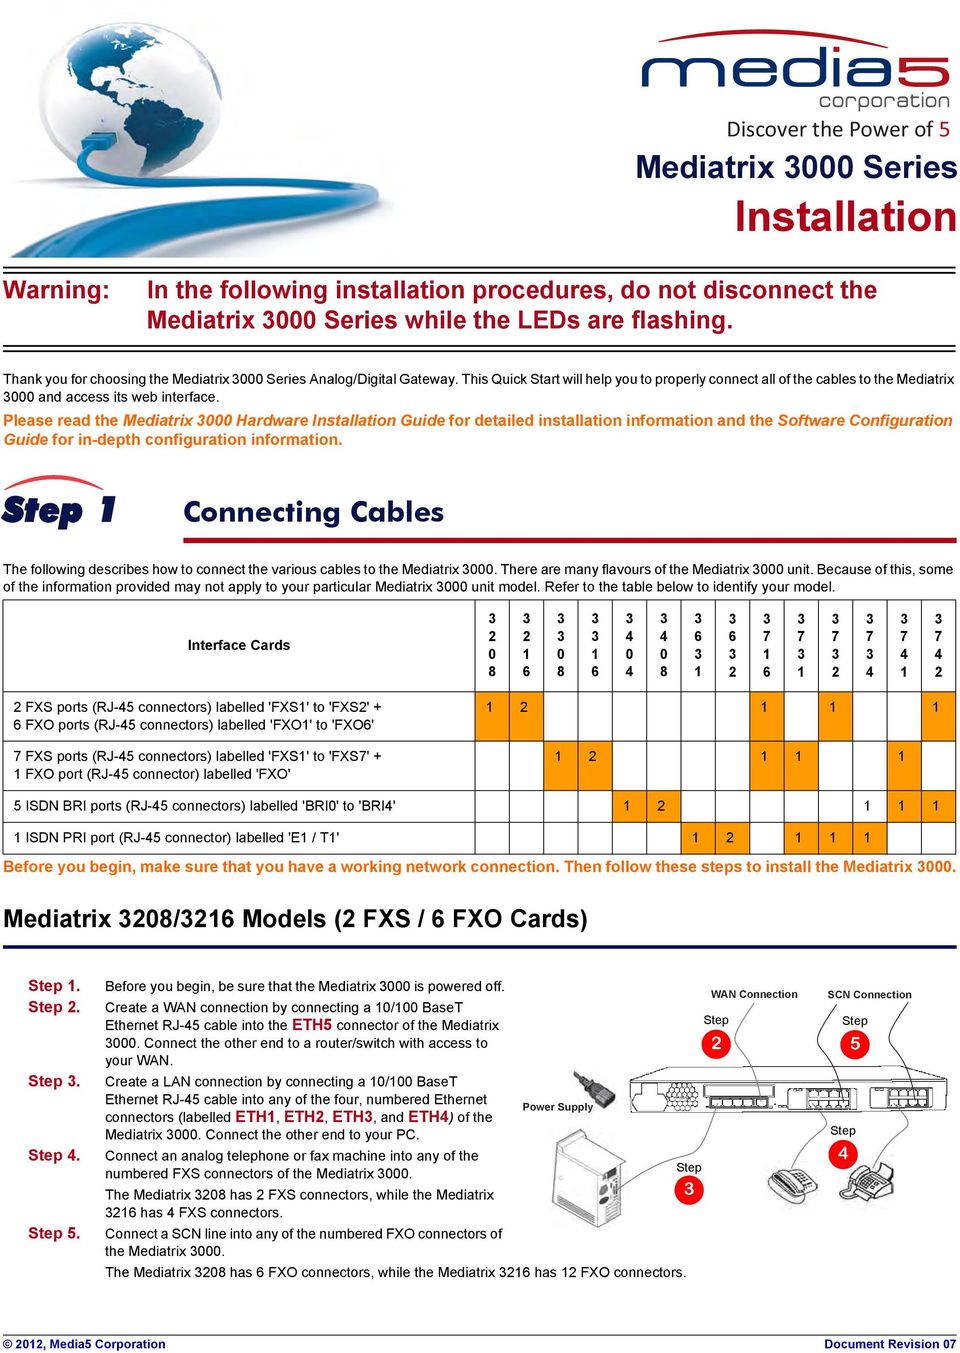 Please read the Mediatrix 000 Hardware Installation Guide for detailed installation information and the Software Configuration Guide for in-depth configuration information.